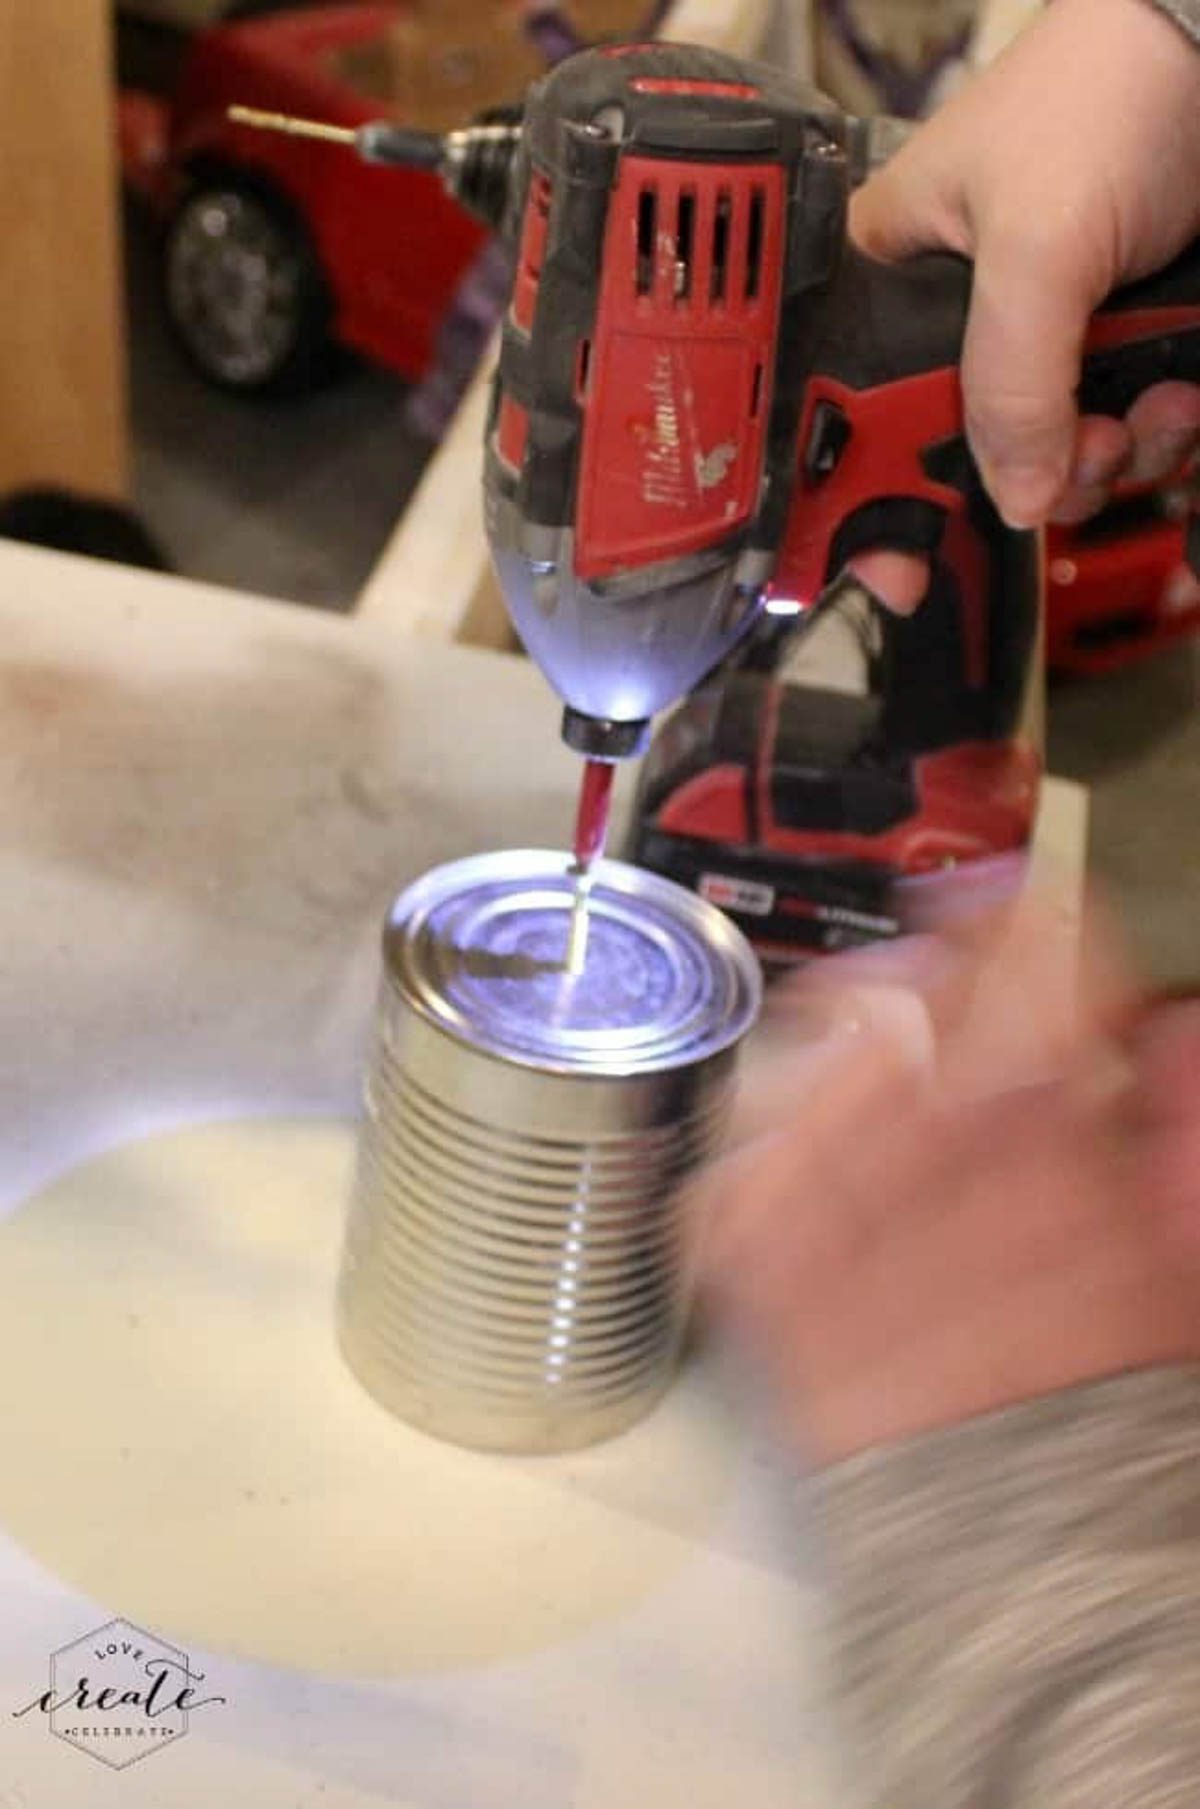 Using a drill and screw to drill into tin can